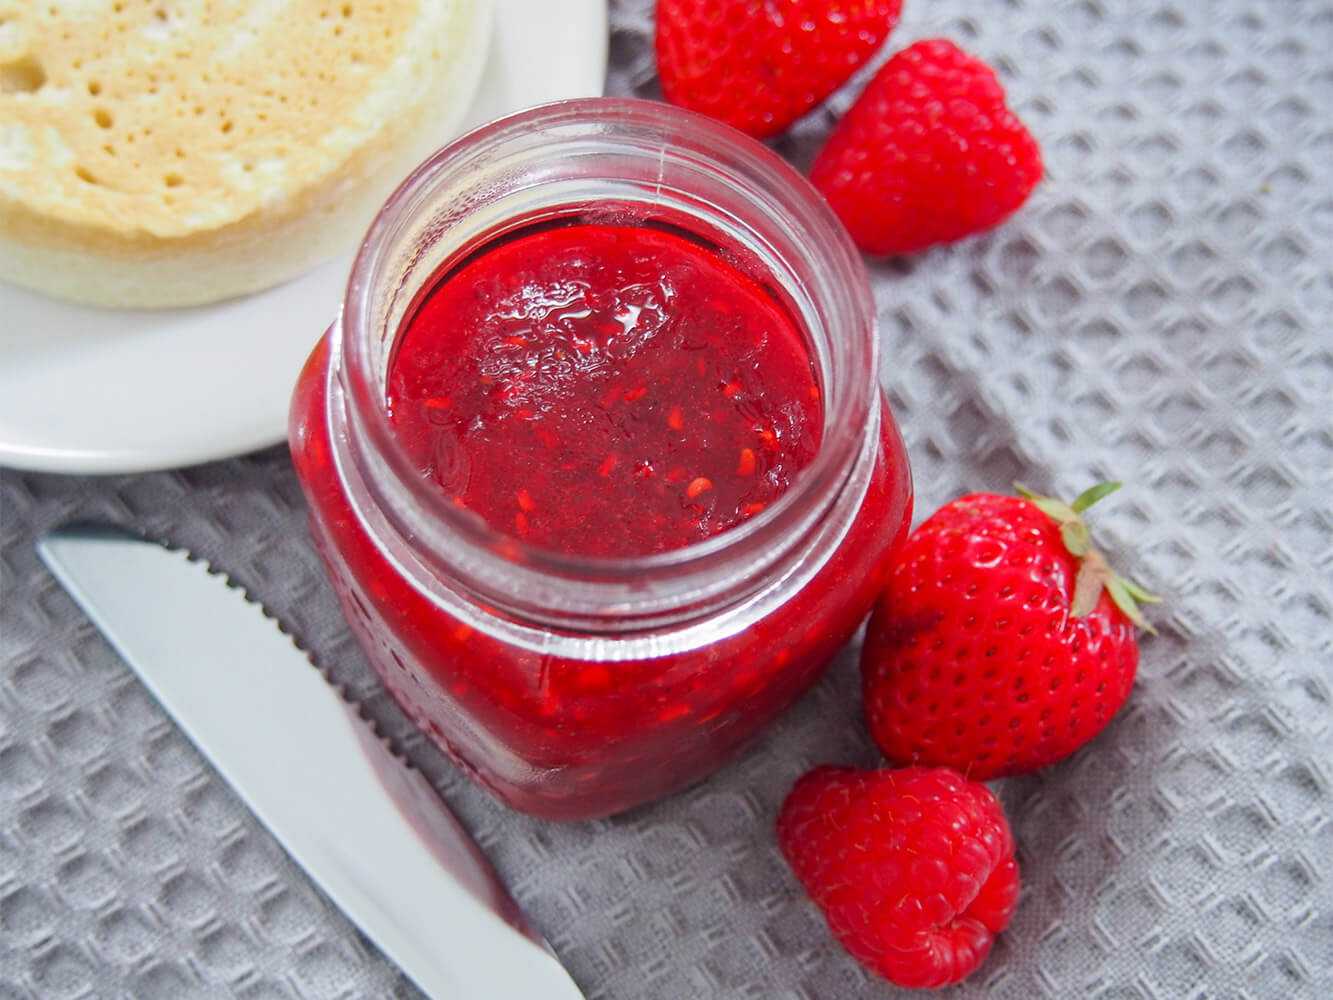 strawberry raspberry jam in jar from overhead with fruit to side and crumpet on plate in corner